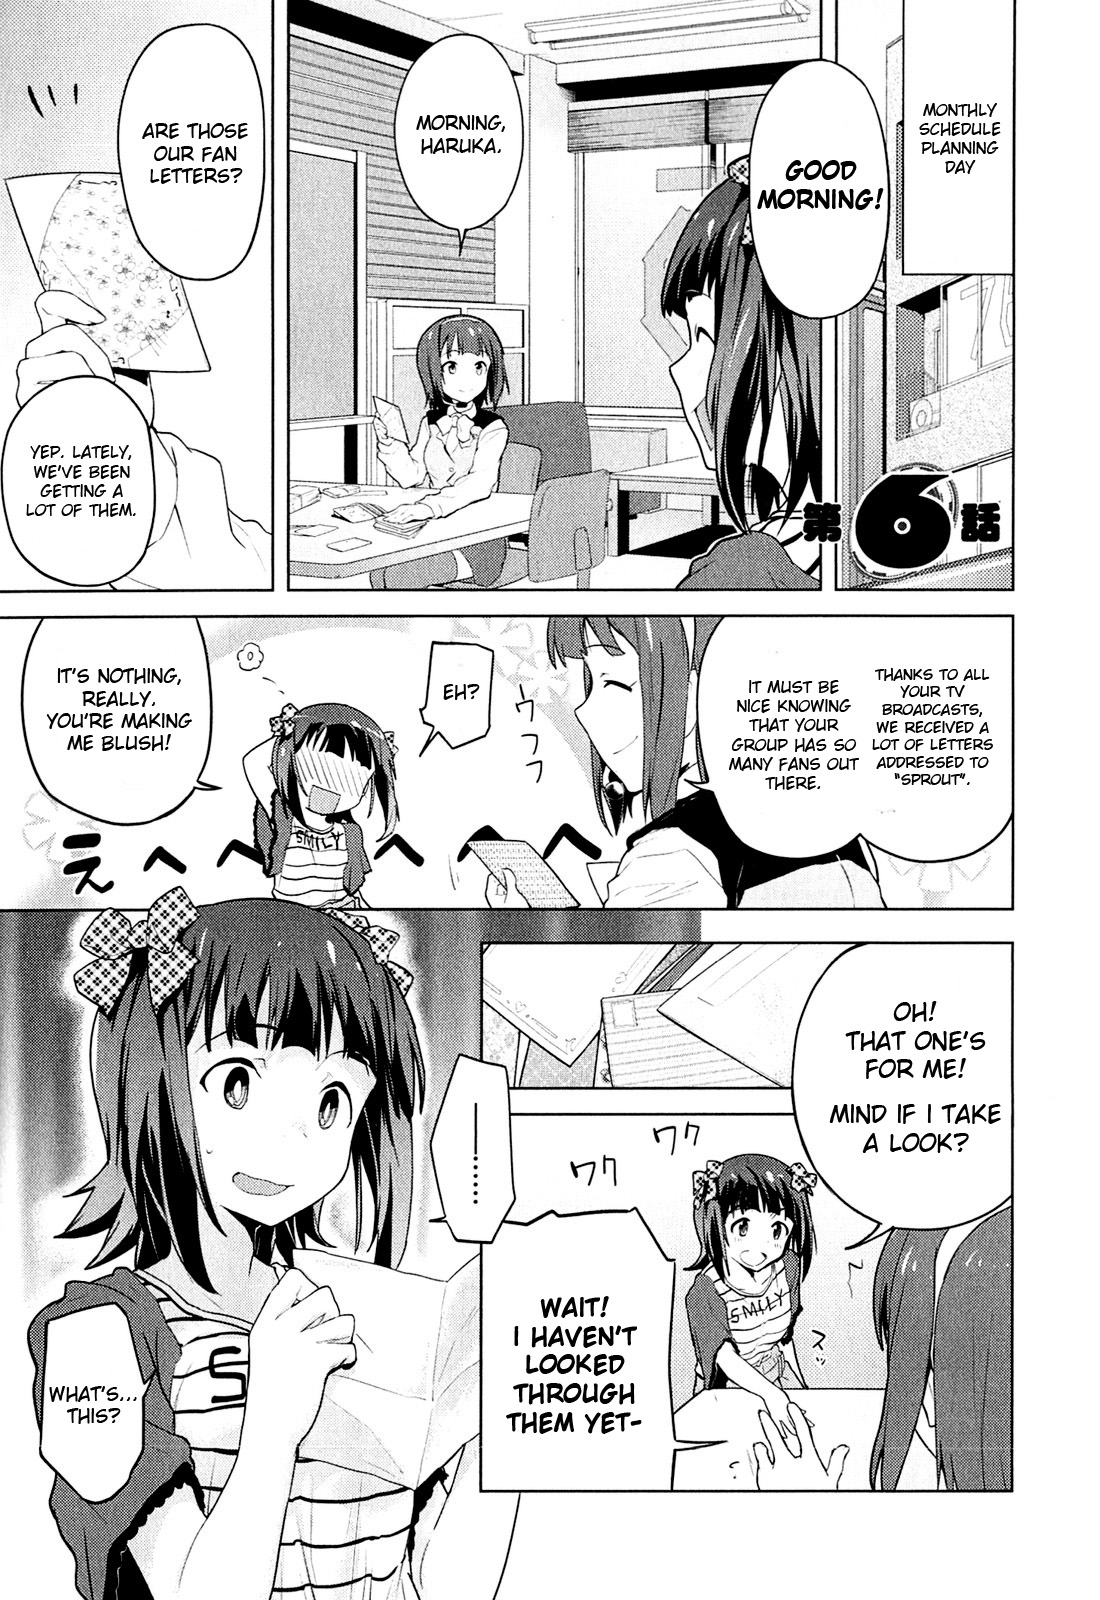 THE iDOLM@STER 2 The world is all one!! Vol. 1 Ch. 6 Smiling Lost Girl